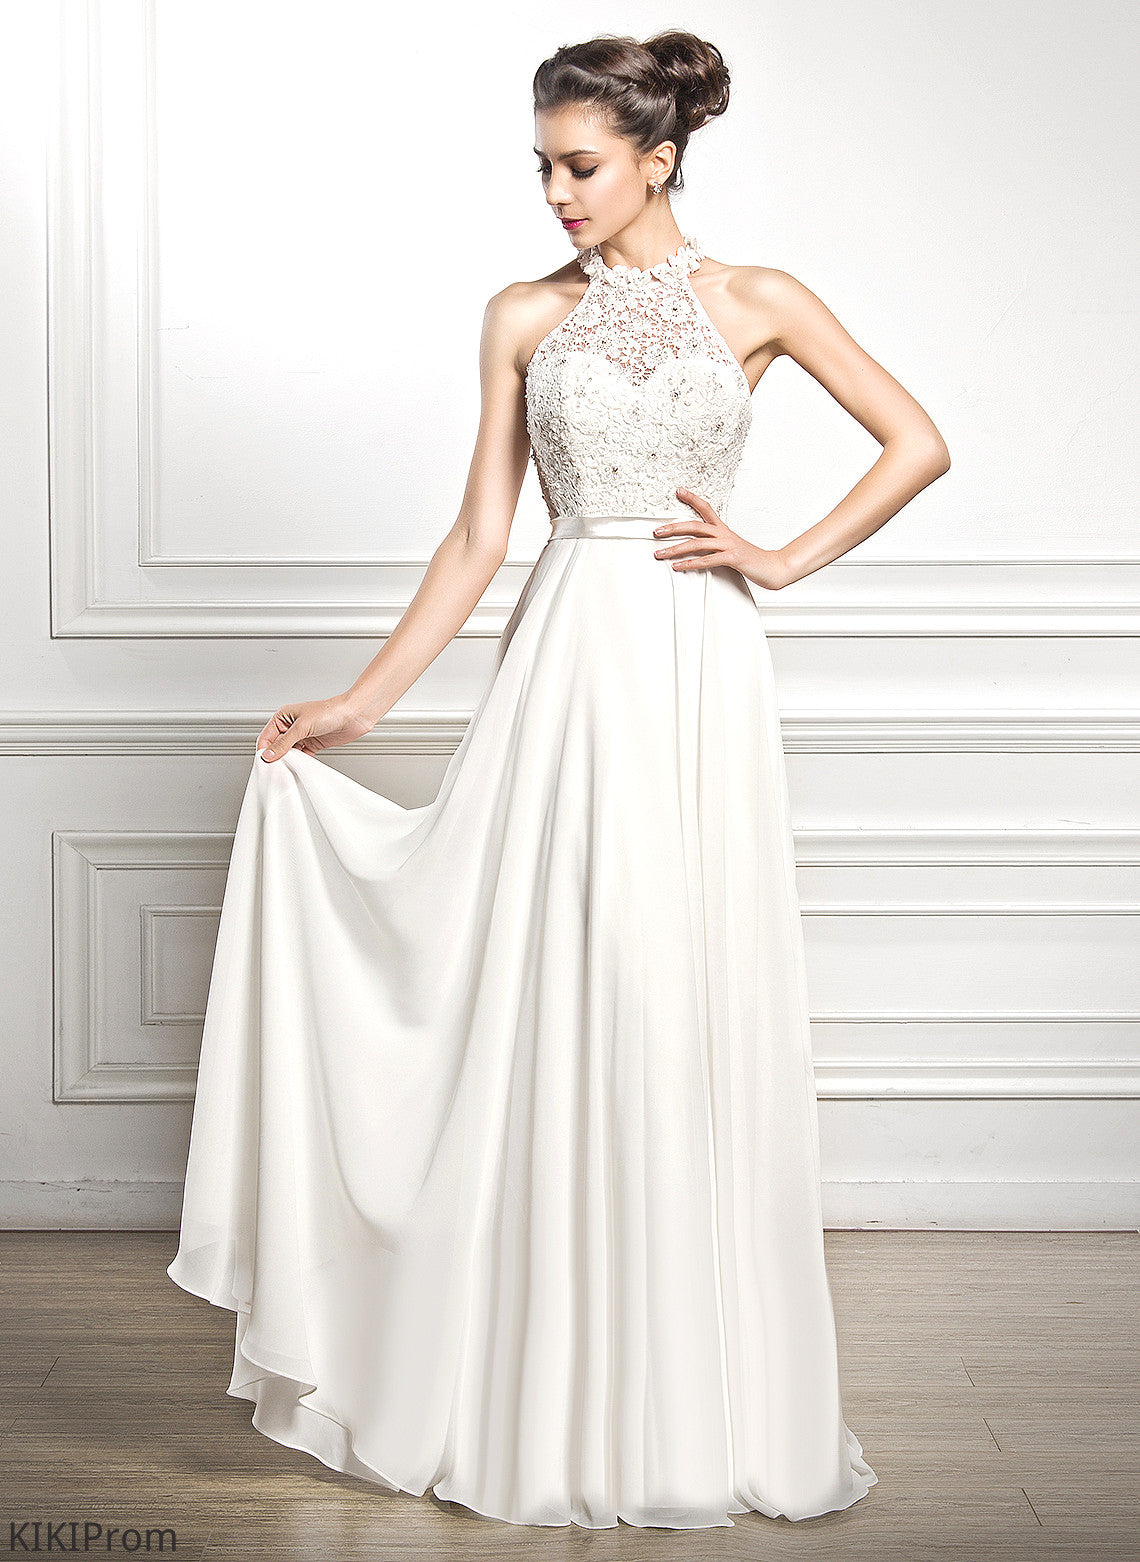 Sequins Wedding Dresses Dress A-Line Chiffon Beading Lace Floor-Length Wedding Eve With